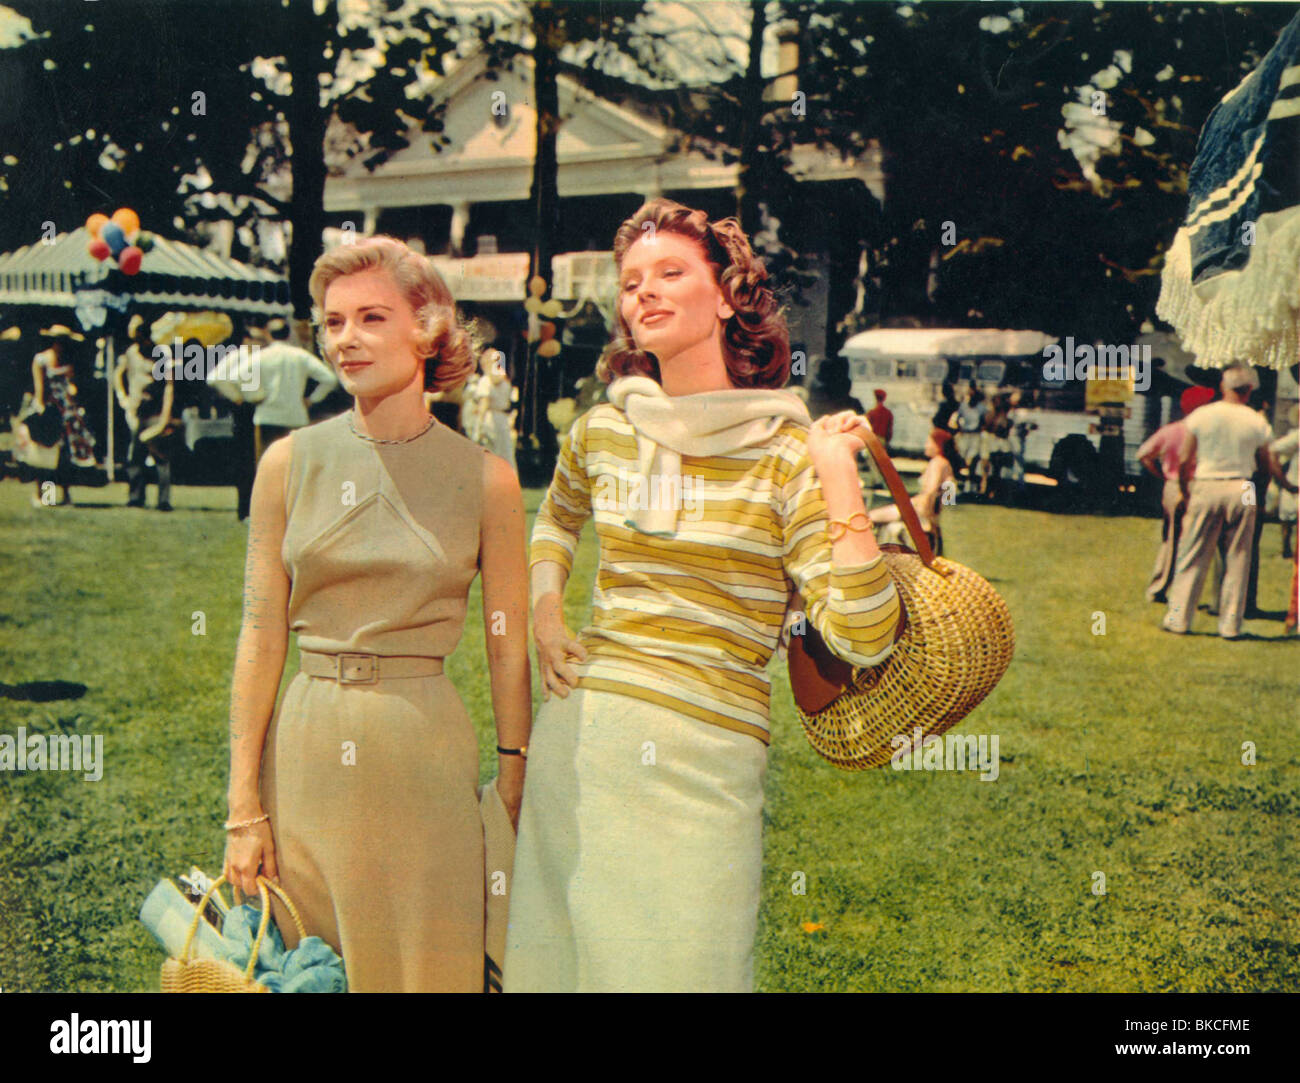 THE BEST OF EVERYTHING (1959) HOPE LANGE, SUZY PARKER BOET 003FOH Stock Photo